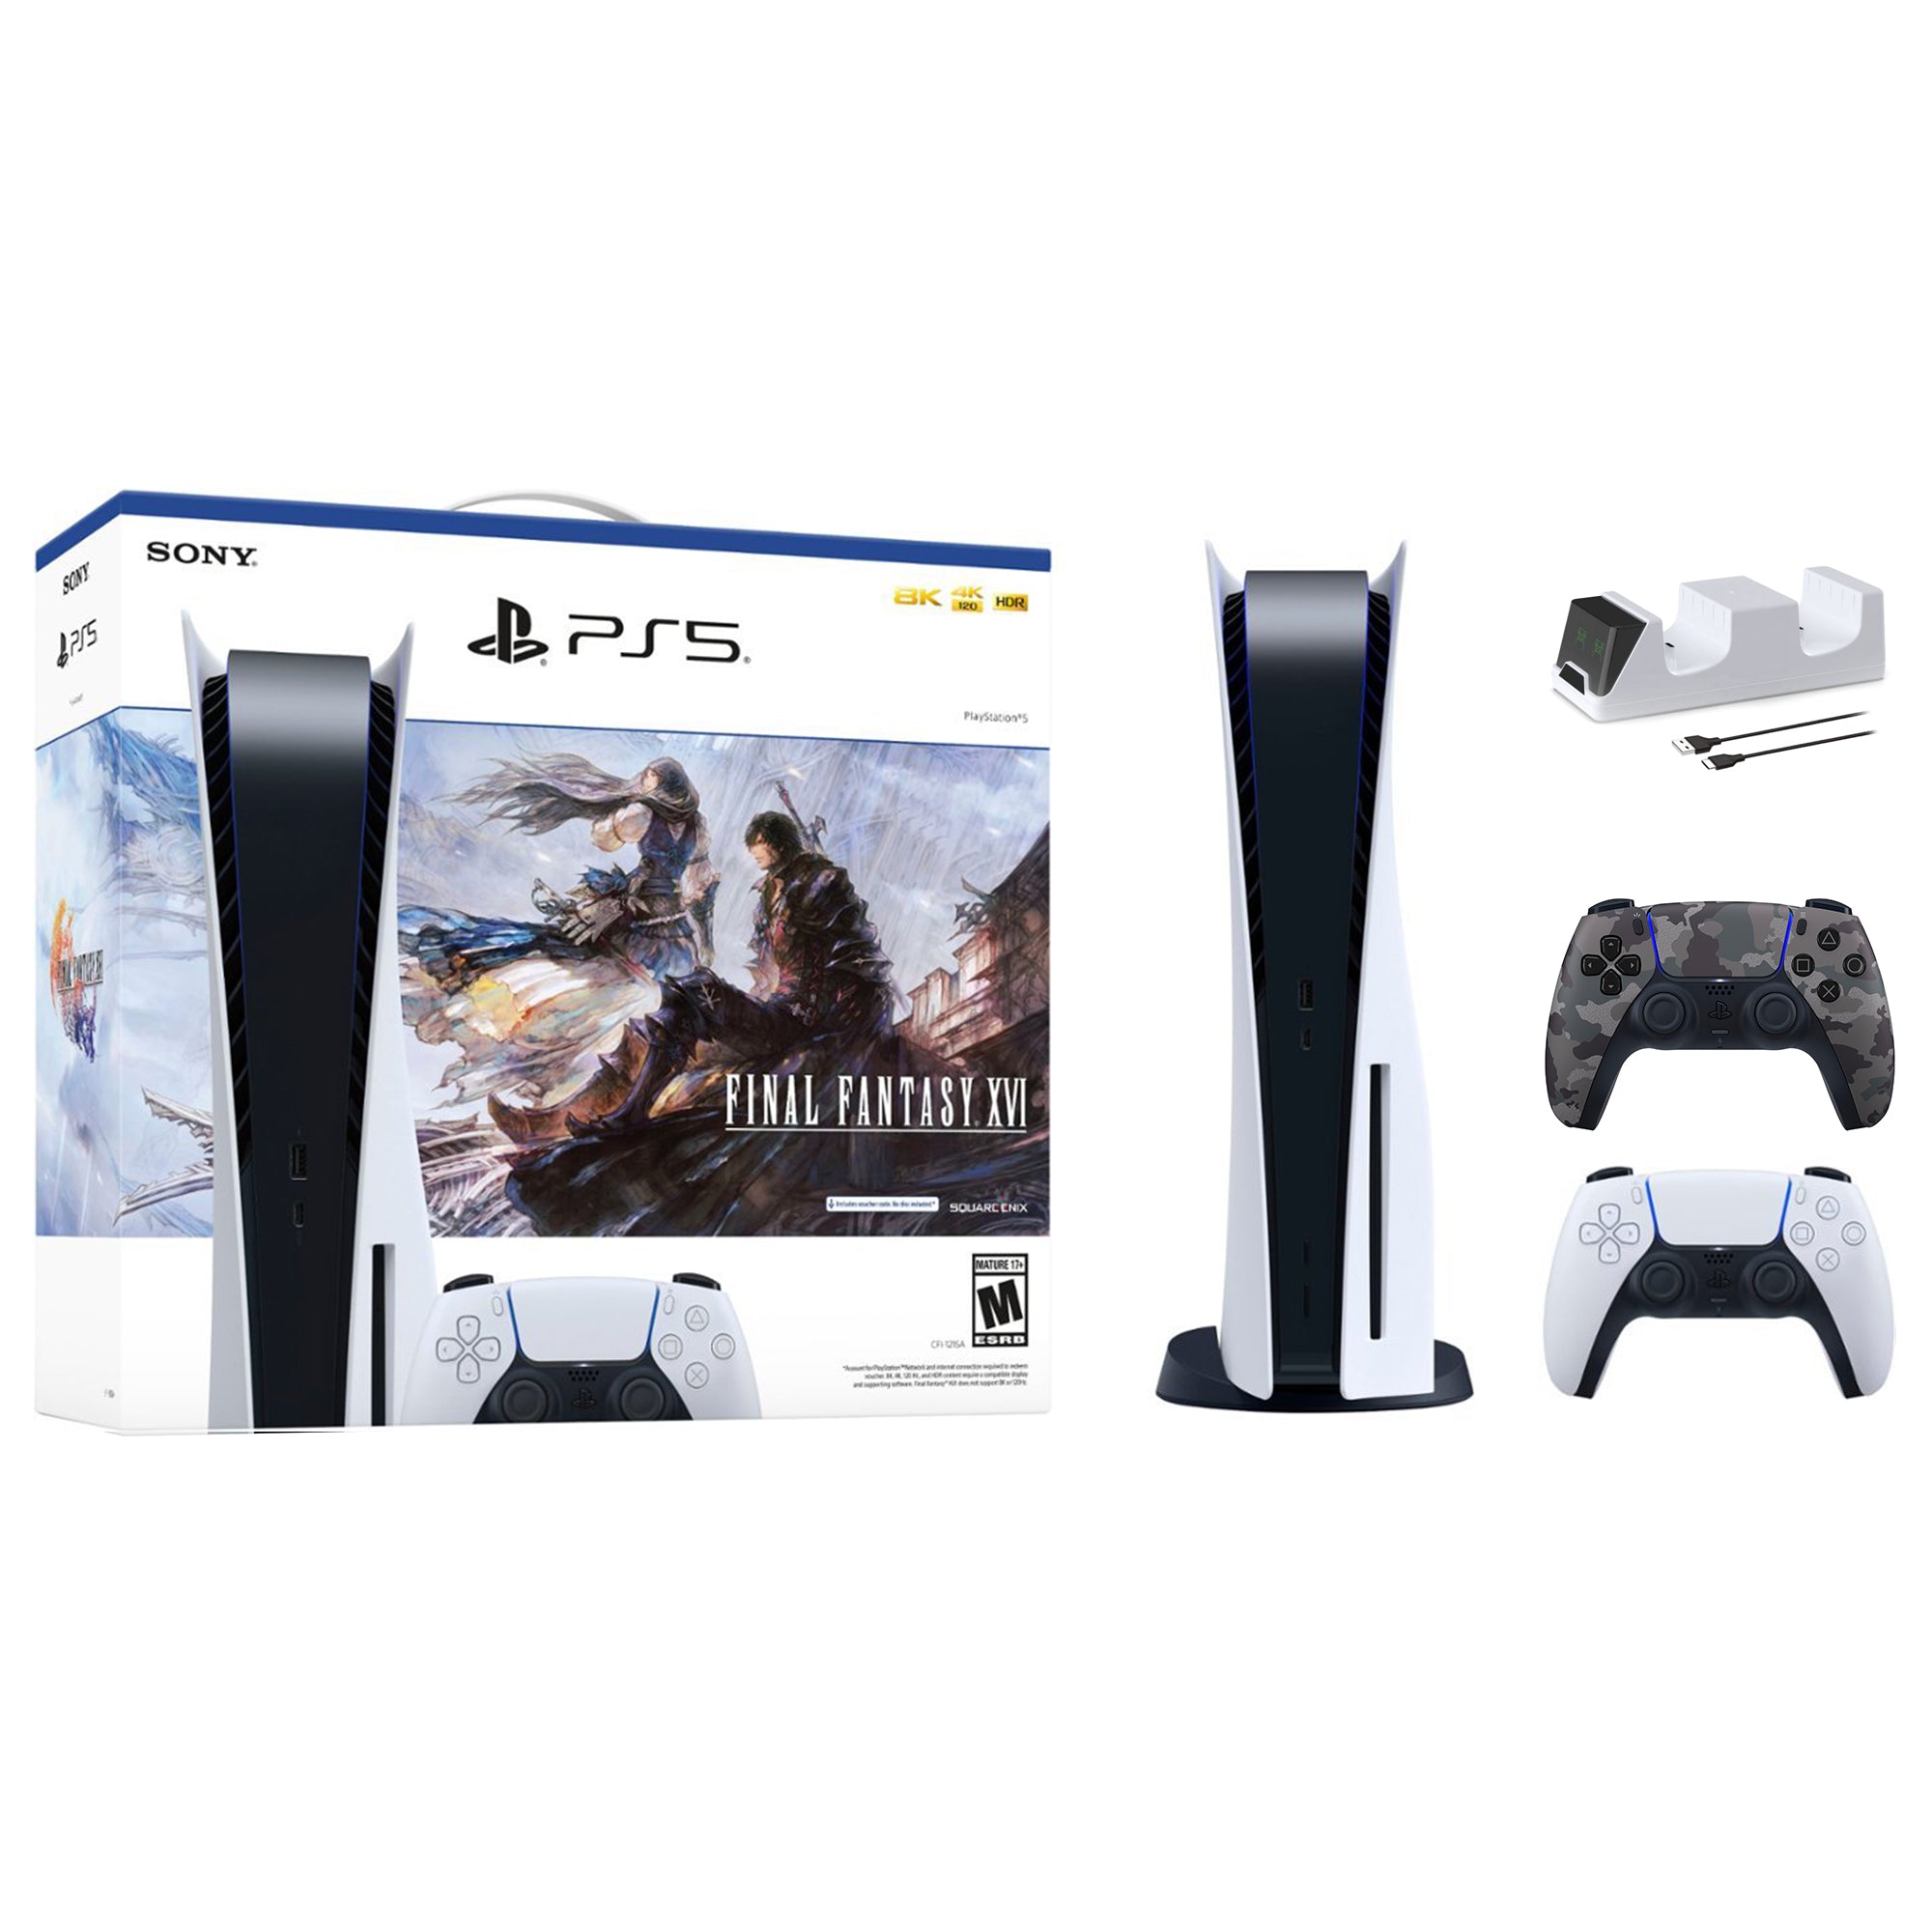 PlayStation 5 Disc Edition FINAL FANTASY XVI Bundle with Two Controllers White and Gray Camouflage DualSense and Mytrix Dual Controller Charger - PS5 Gaming Console